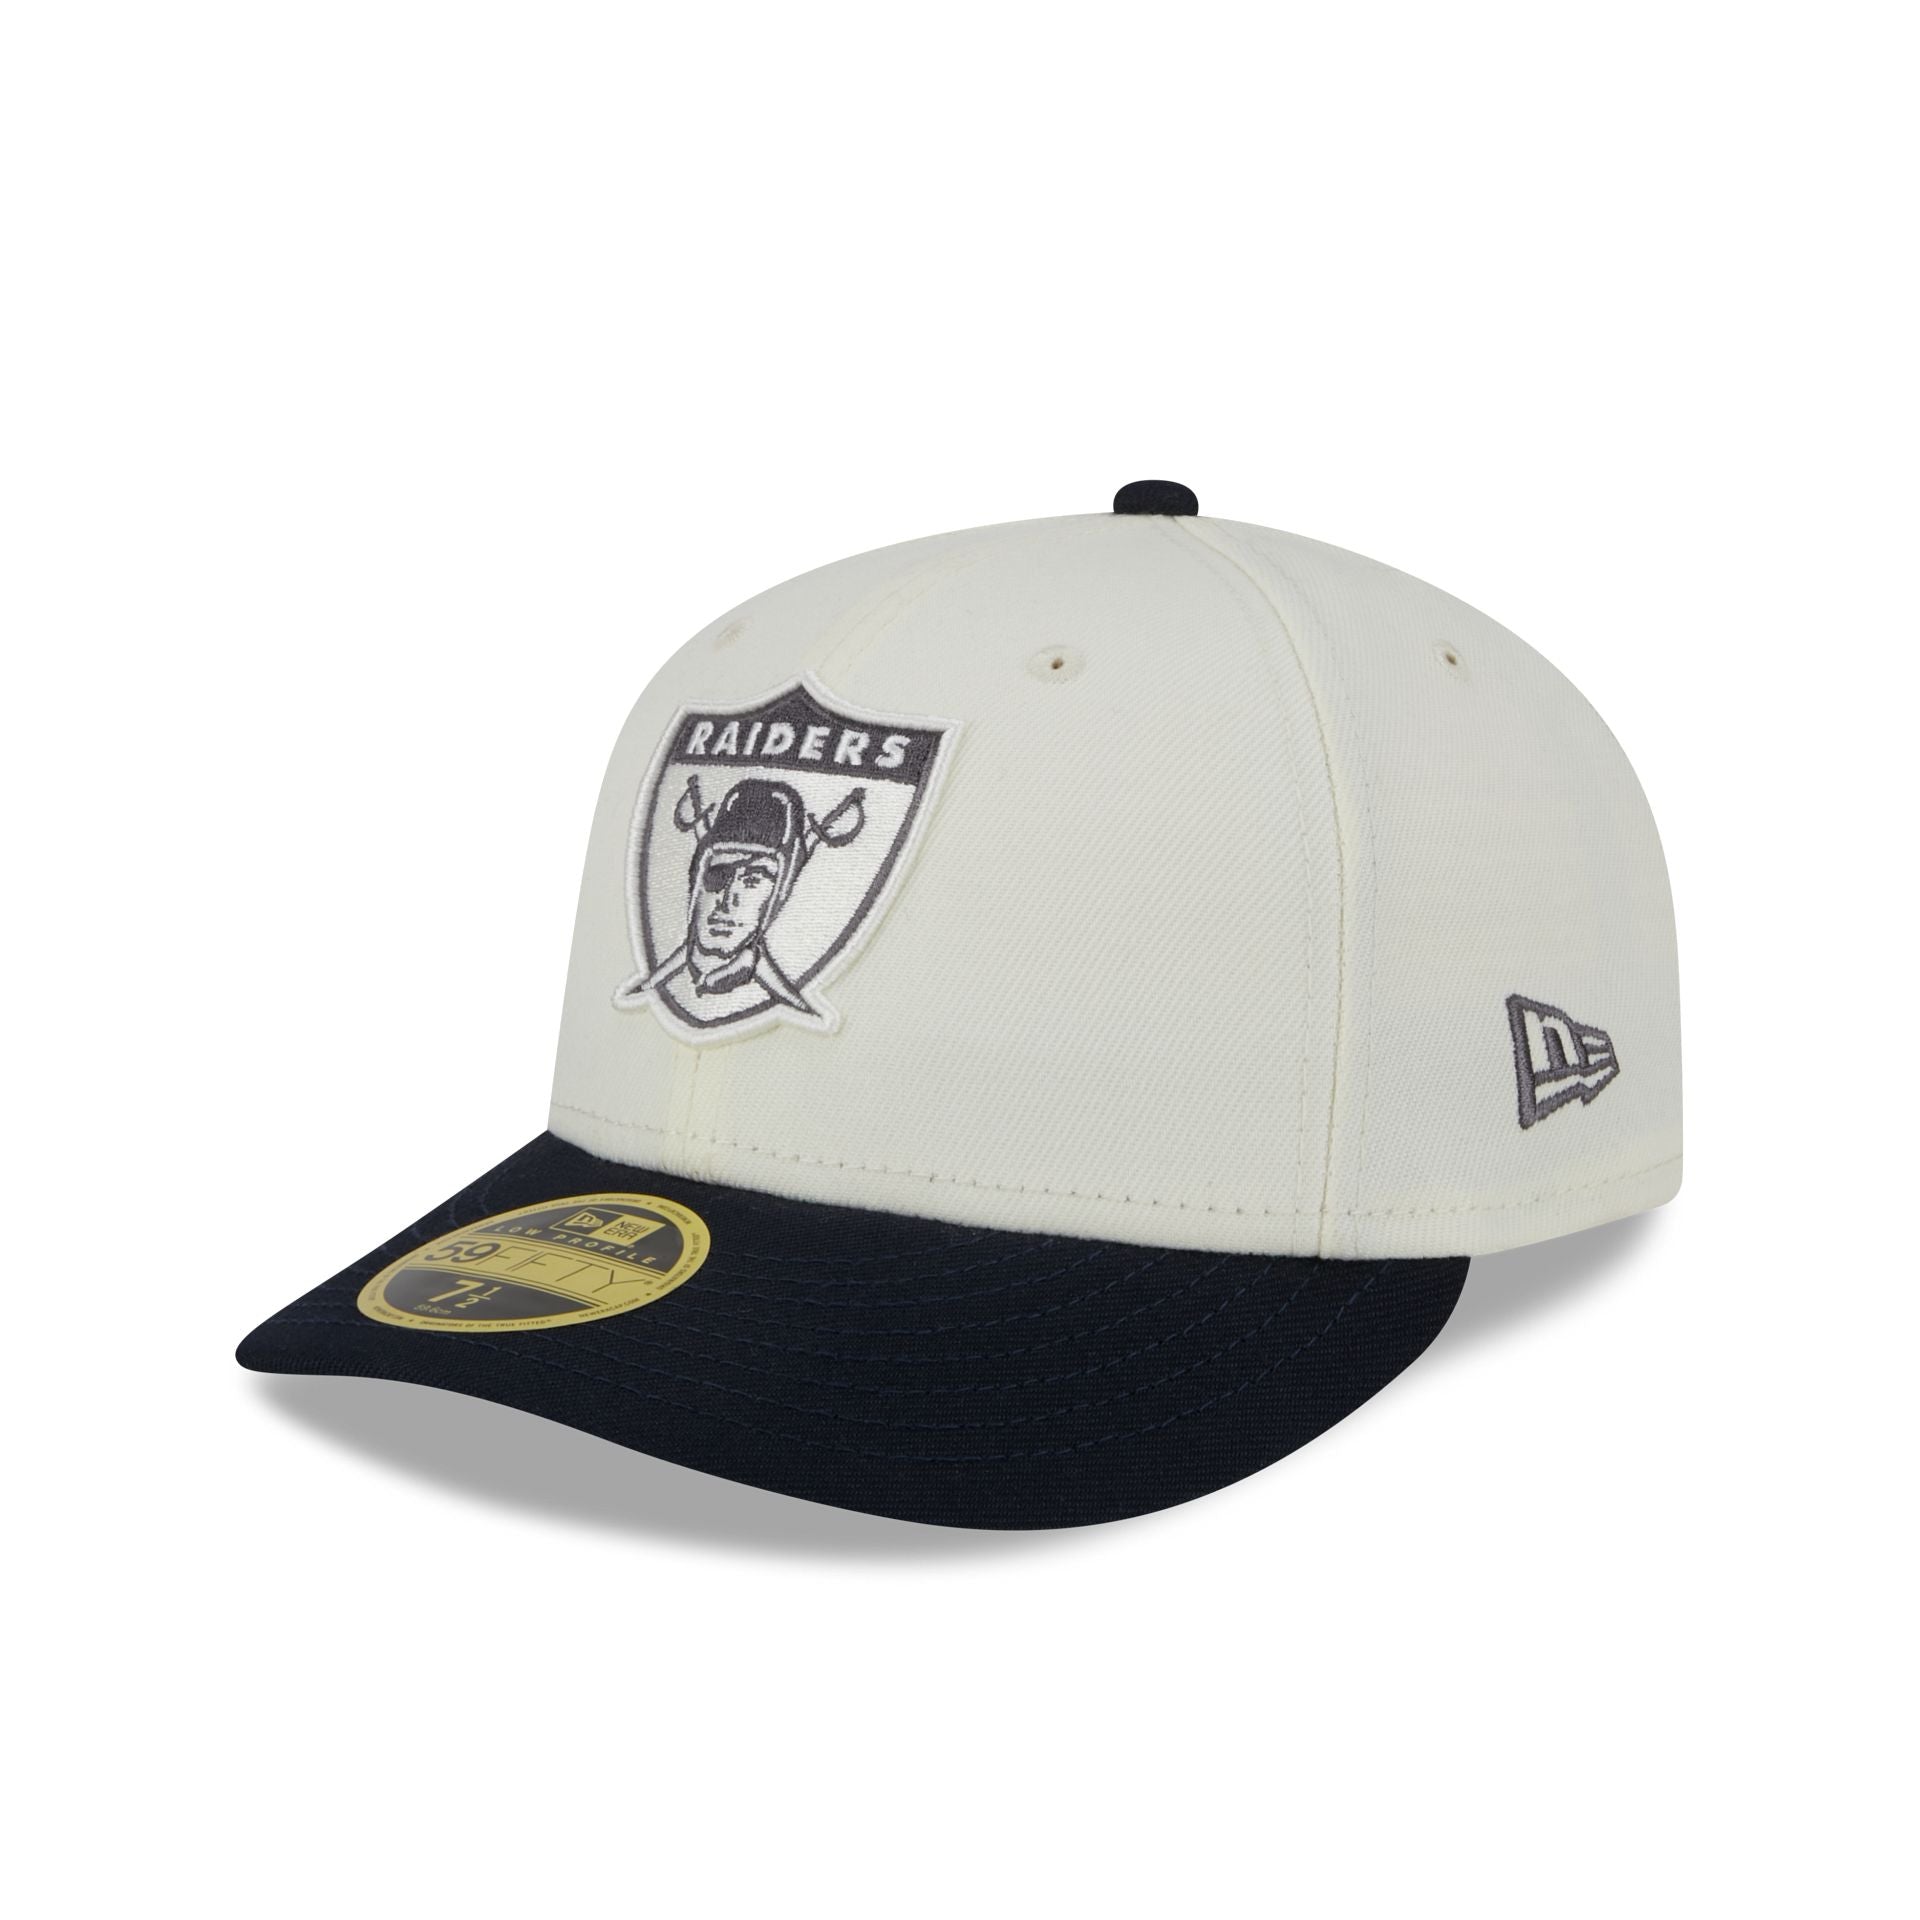 Las Vegas Raiders Chrome Crown Low Profile 59FIFTY Fitted Hat, White - Size: 7 1/2, NFL by New Era